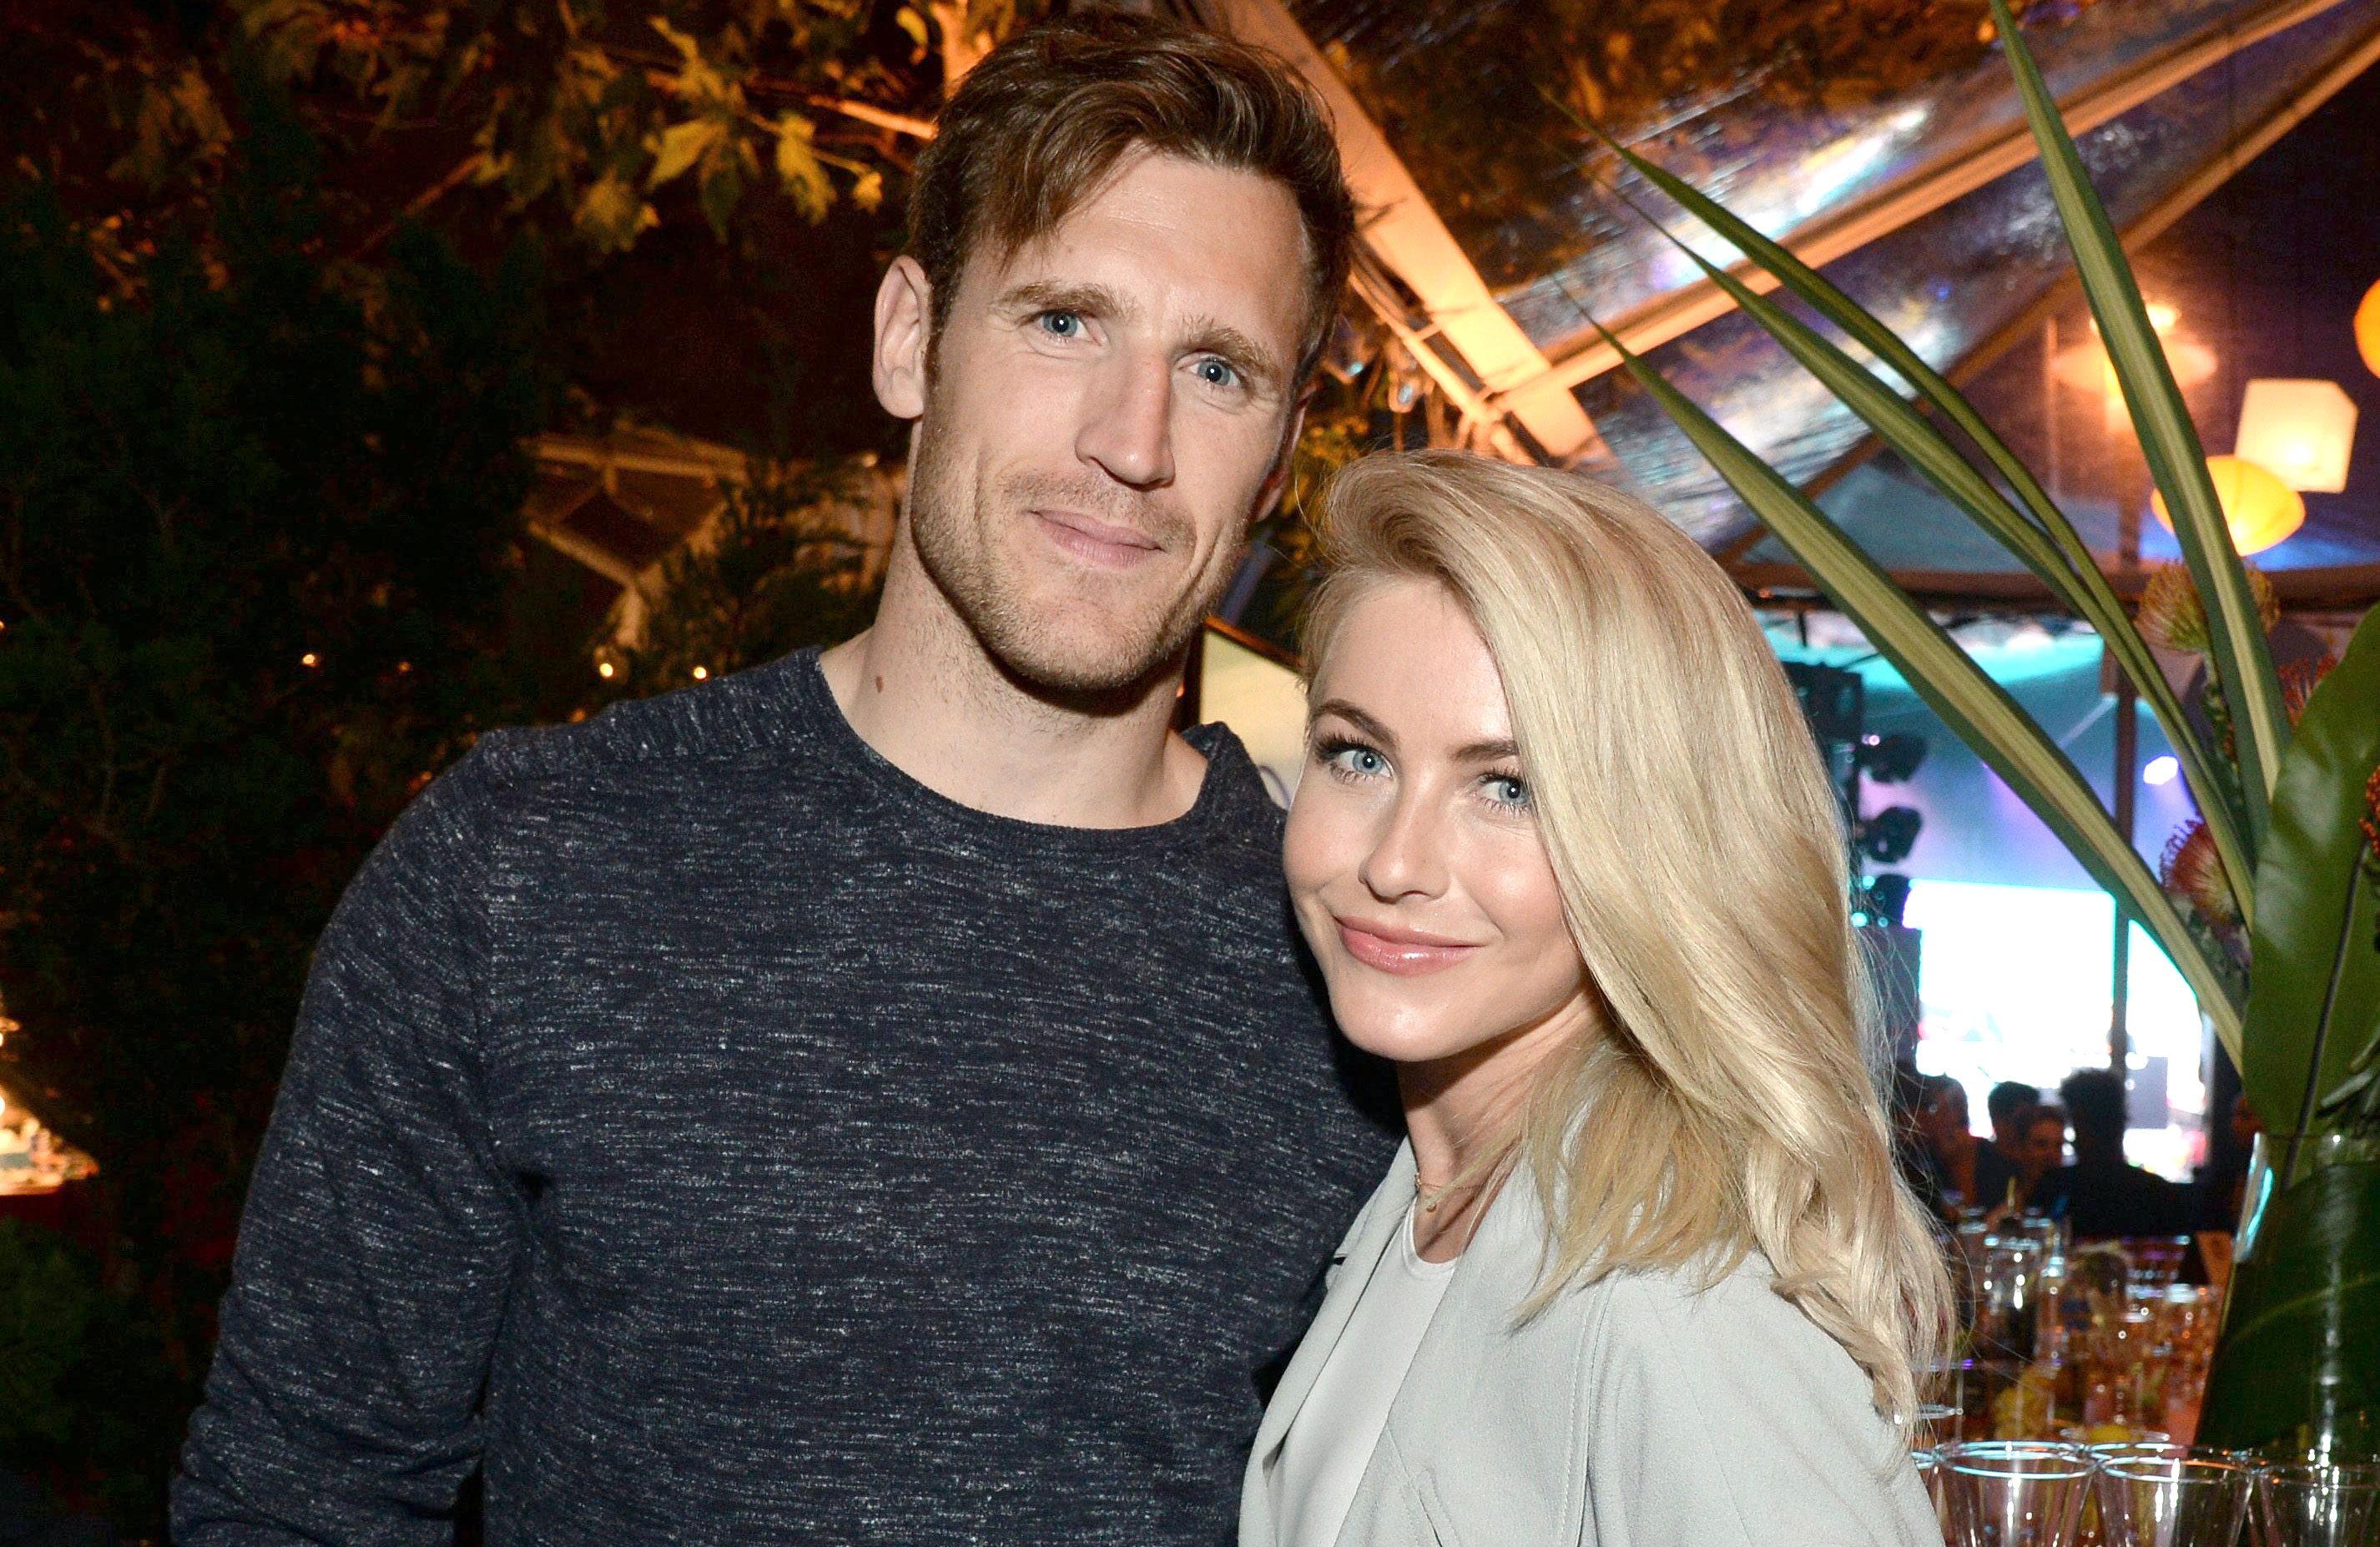 Julianne Hough's fiancé Brooks Laich puts her over his head while